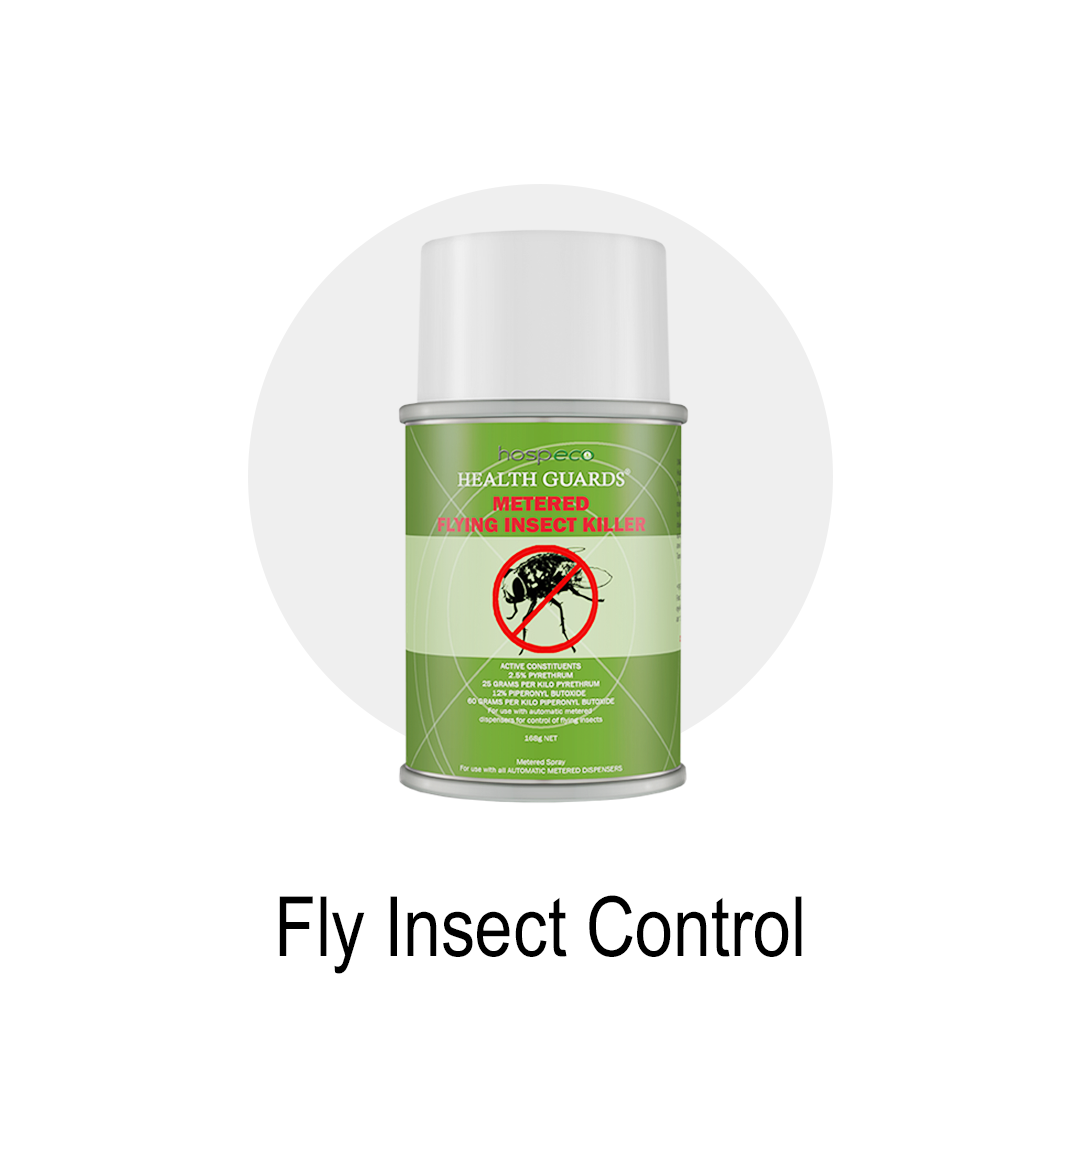 Fly Insect Control